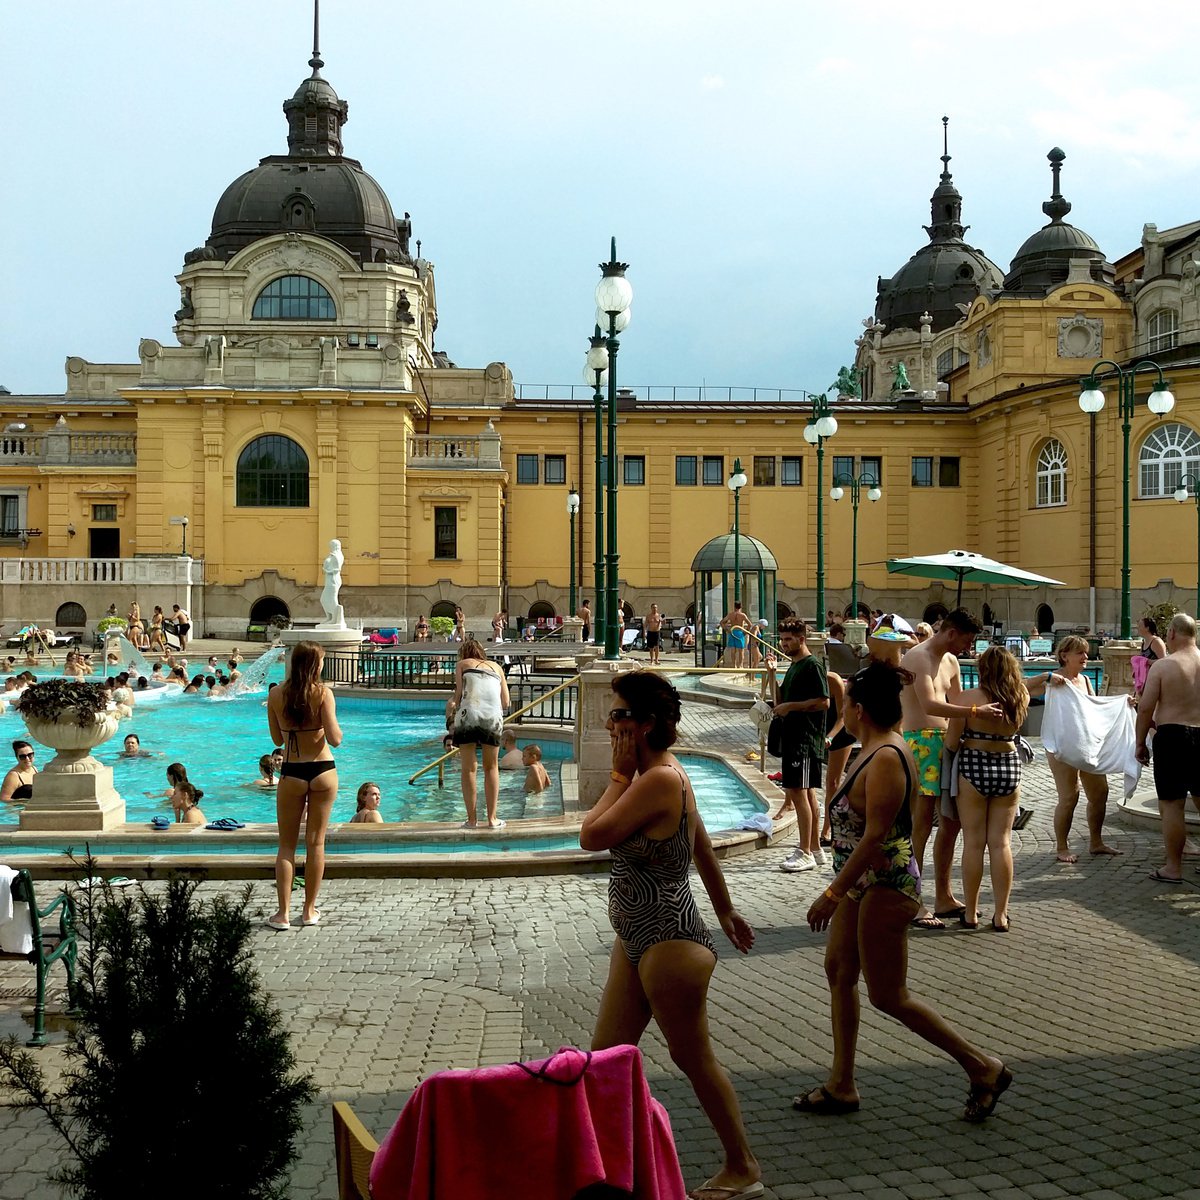 Budapest Bath House - Budapest Colour Travel Photography Print, 12x12 Inches, C-Type, Unfr... by Amadeus Long